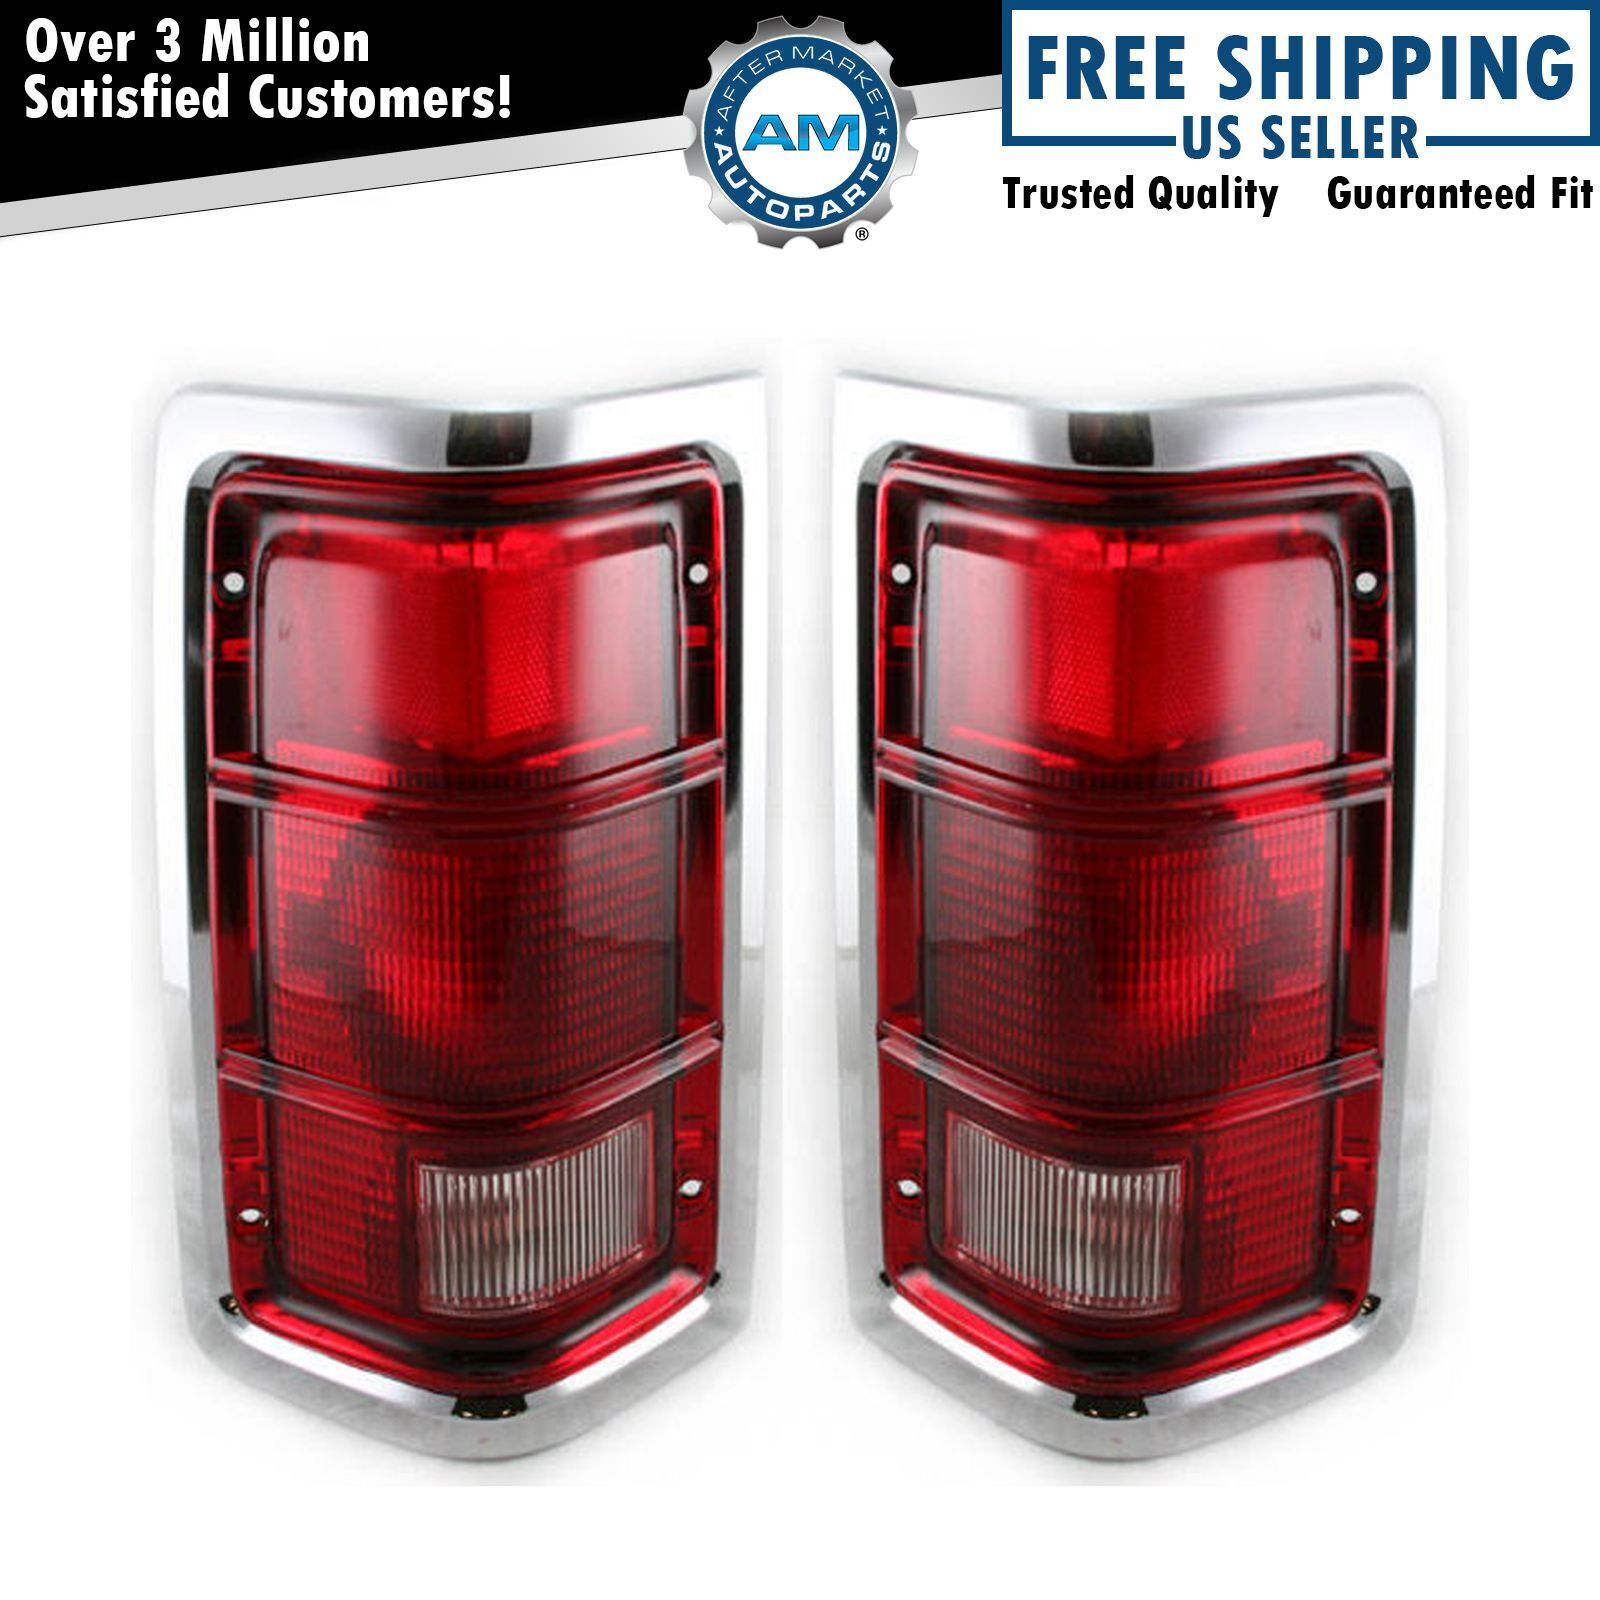 Tail Lights Taillamps w/ Chrome Trim Pair Set for Dodge Ramcharger Pickup Truck